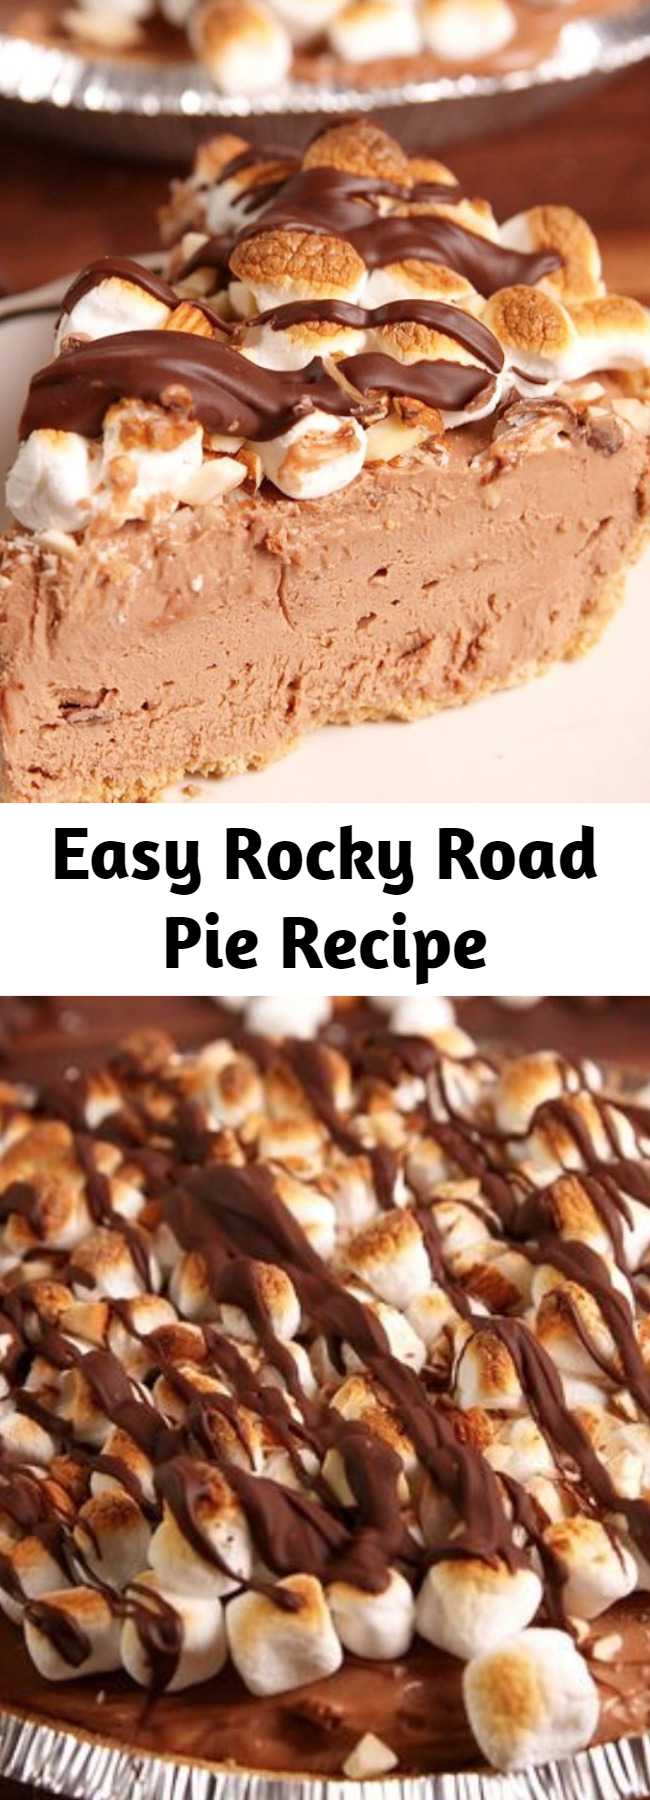 Easy Rocky Road Pie Recipe - Turn your favorite ice cream flavor into a no-bake pie with this easy recipe for rocky road pie.